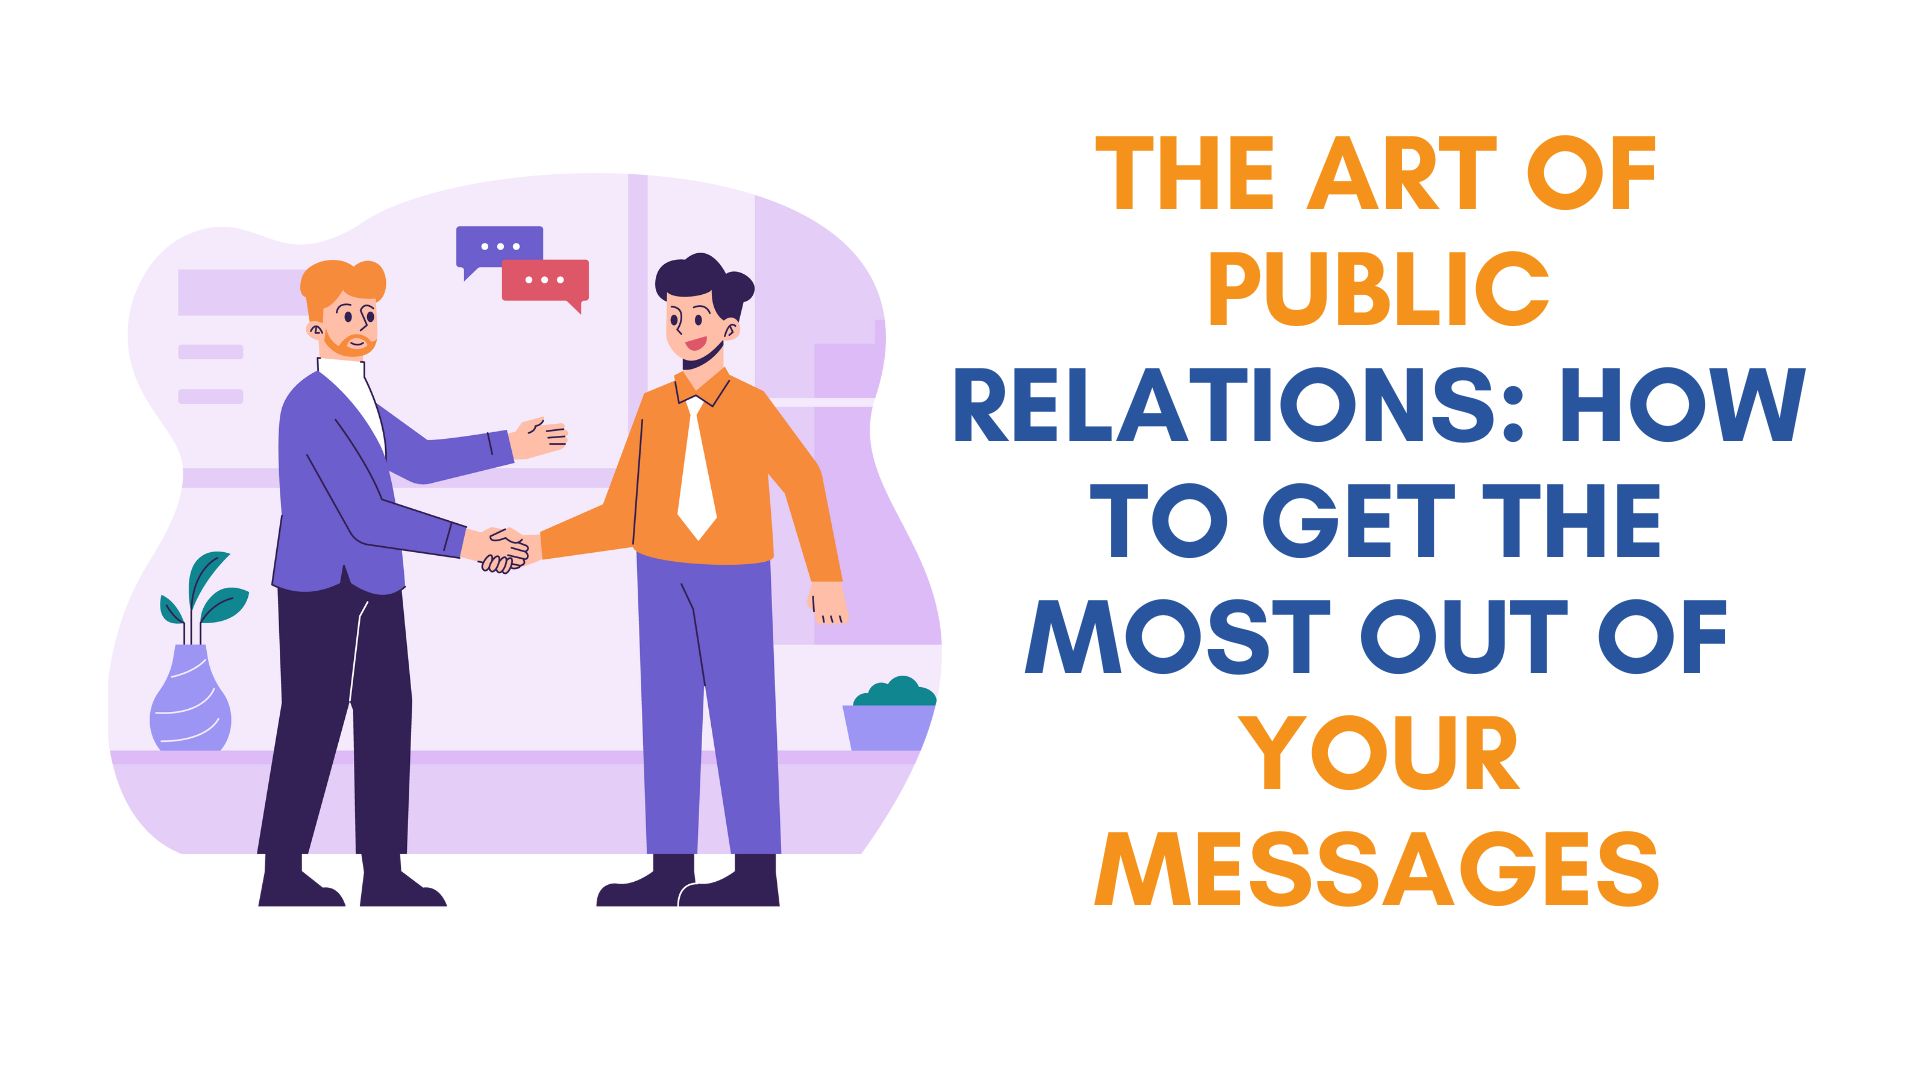 The Art of Public Relations: How to Get the Most Out of Your Messages